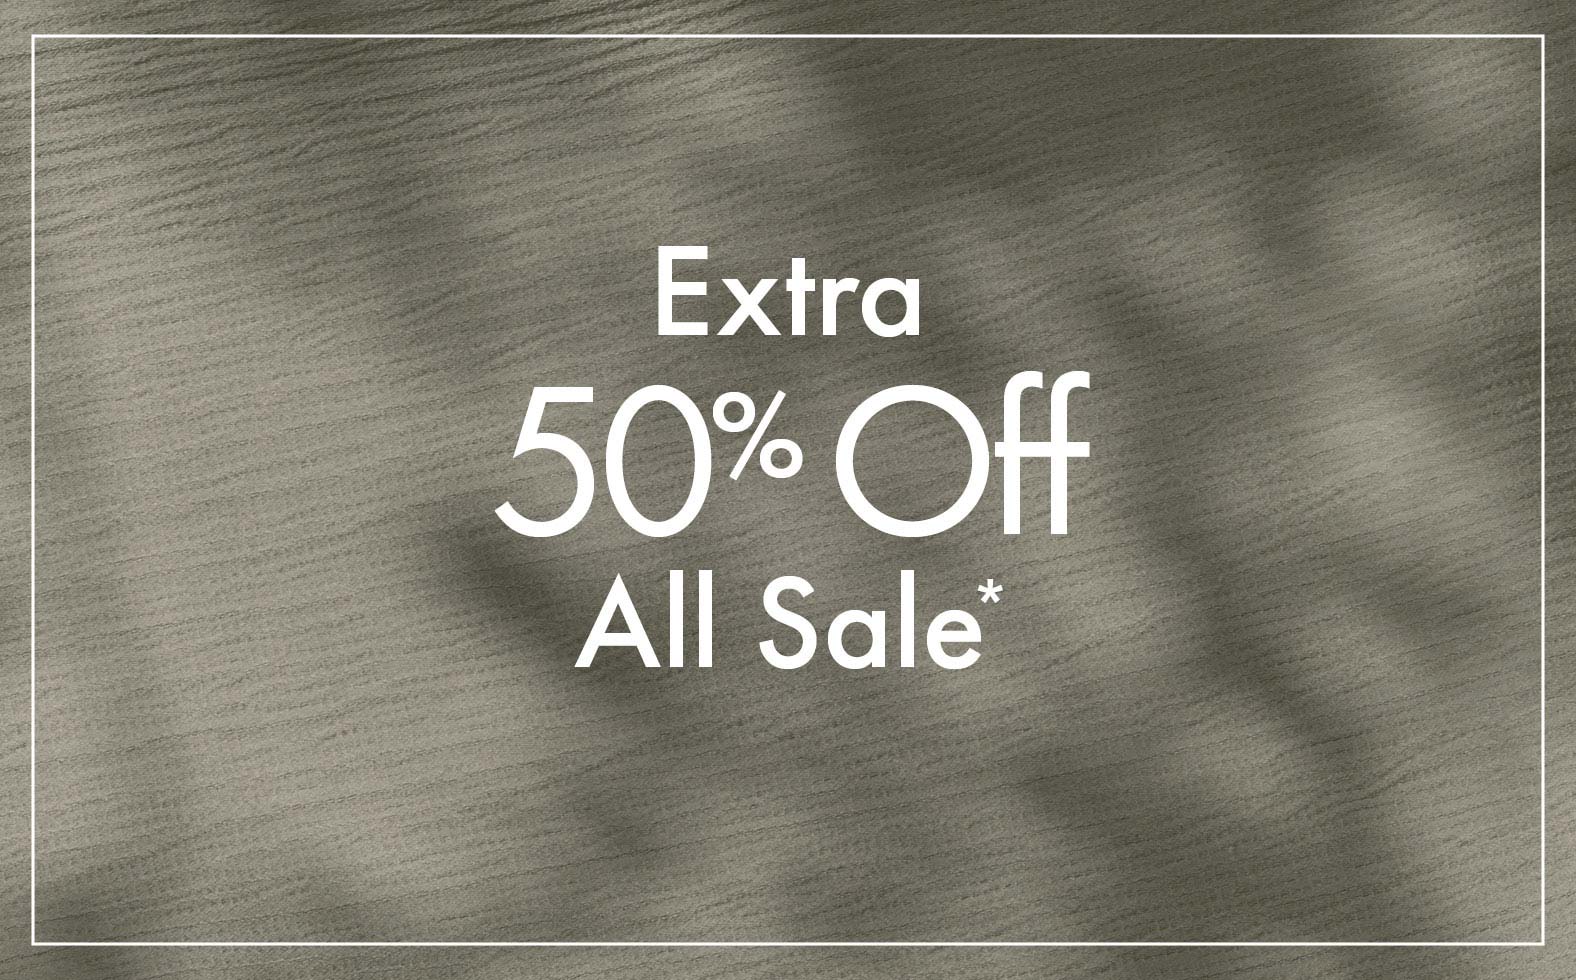 Extra 50% Off All Sale*